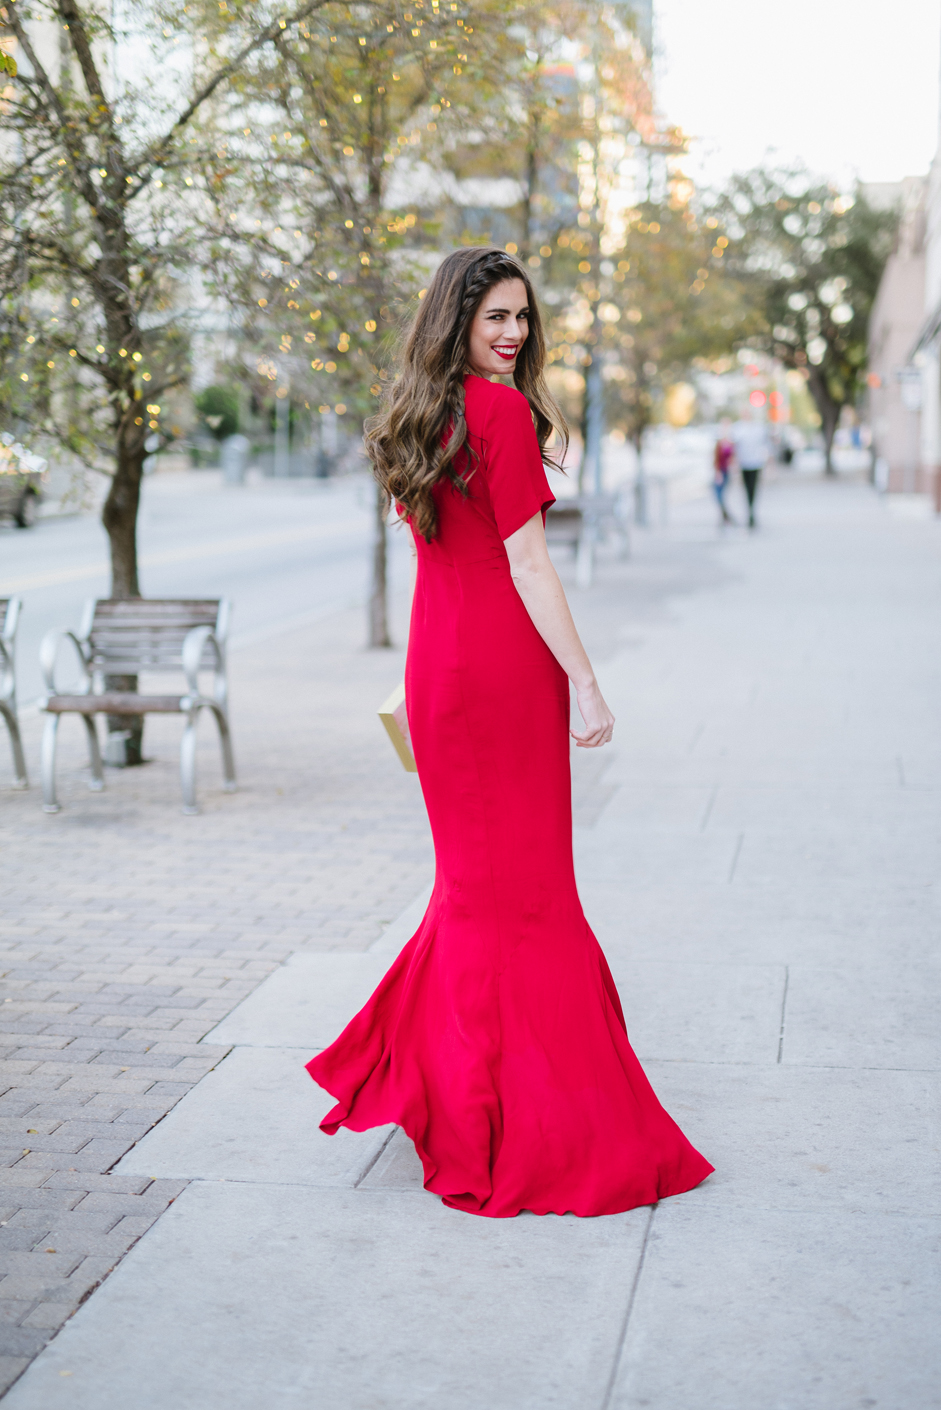 2015 Holiday Party Outfits – Only If You Love It